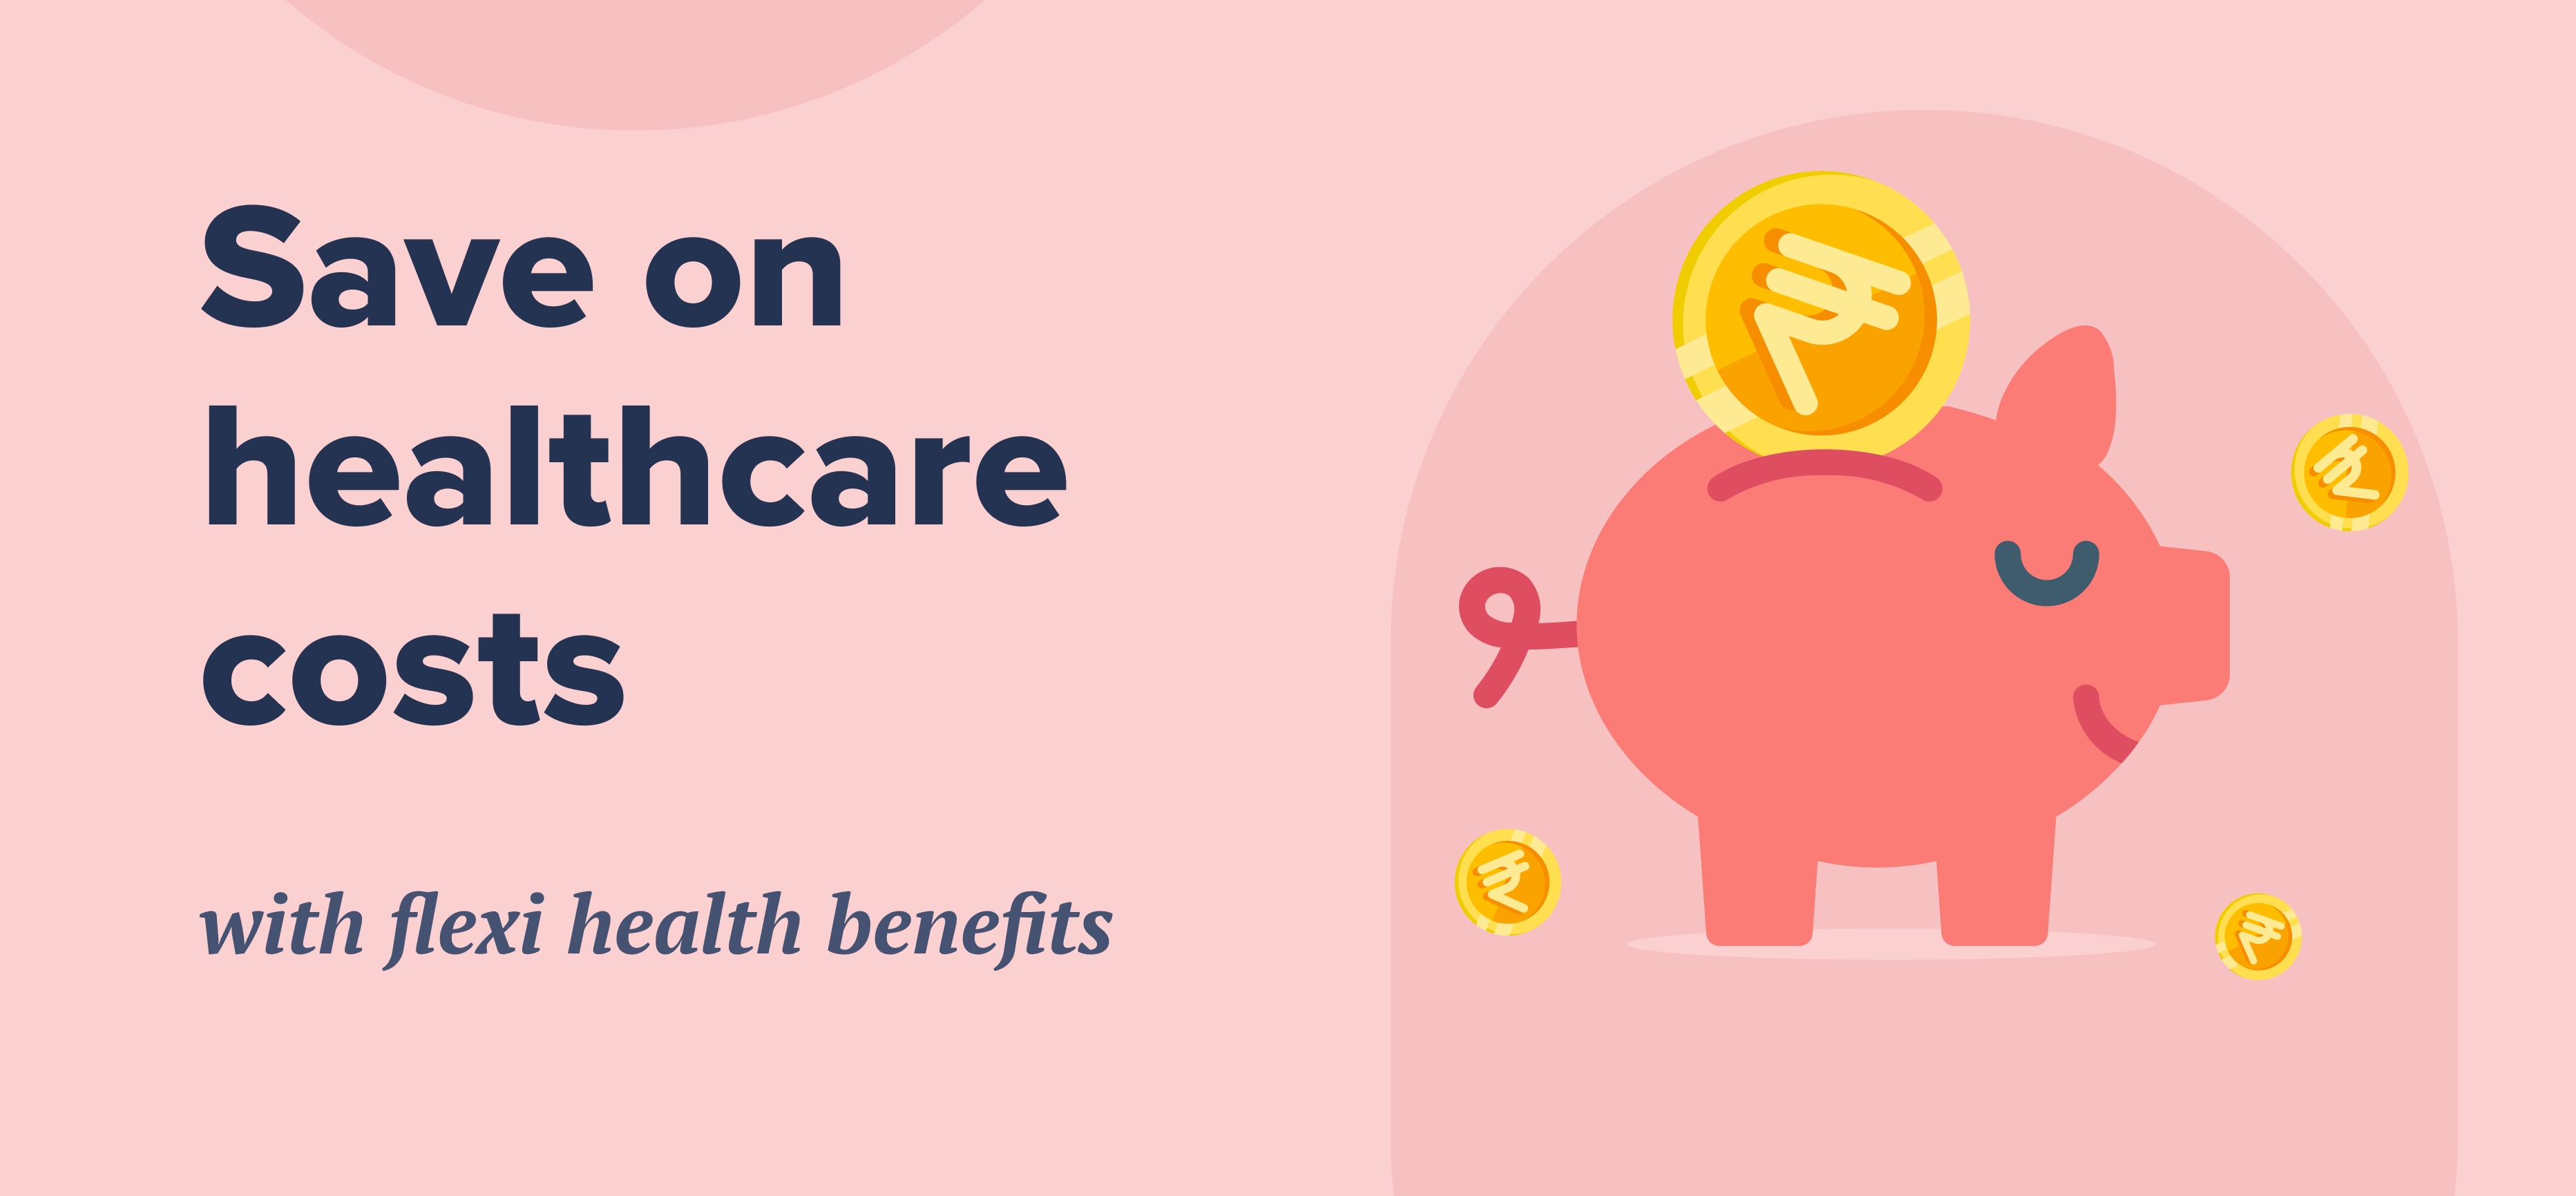 Save on healthcare costs with Flexi Health Benefits